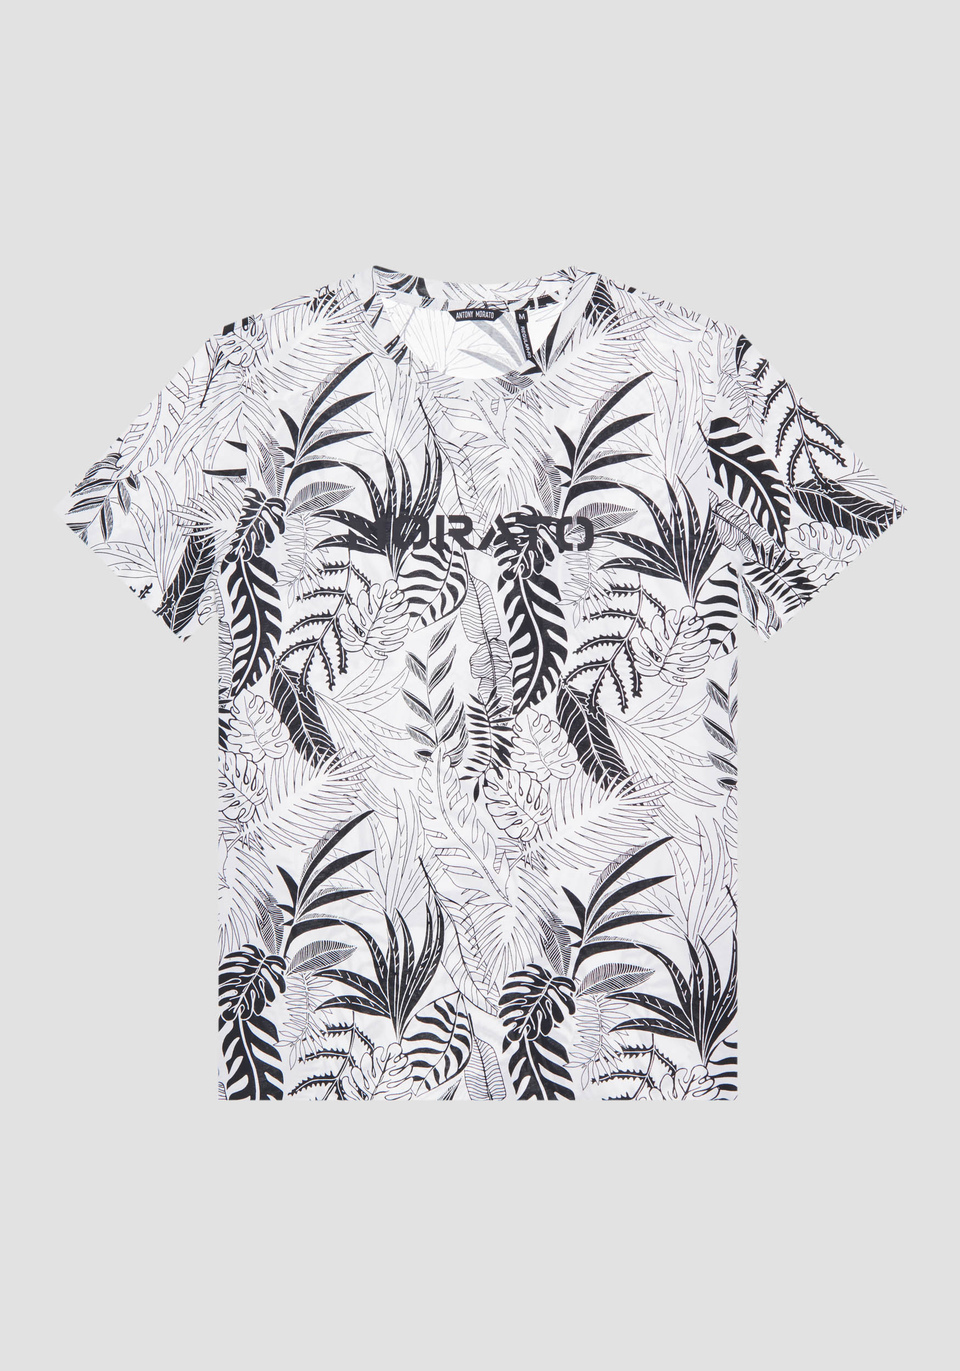 REGULAR-FIT T-SHIRT IN PURE COTTON WITH LOGO AND ALL-OVER JUNGLE PRINT - Antony Morato Online Shop